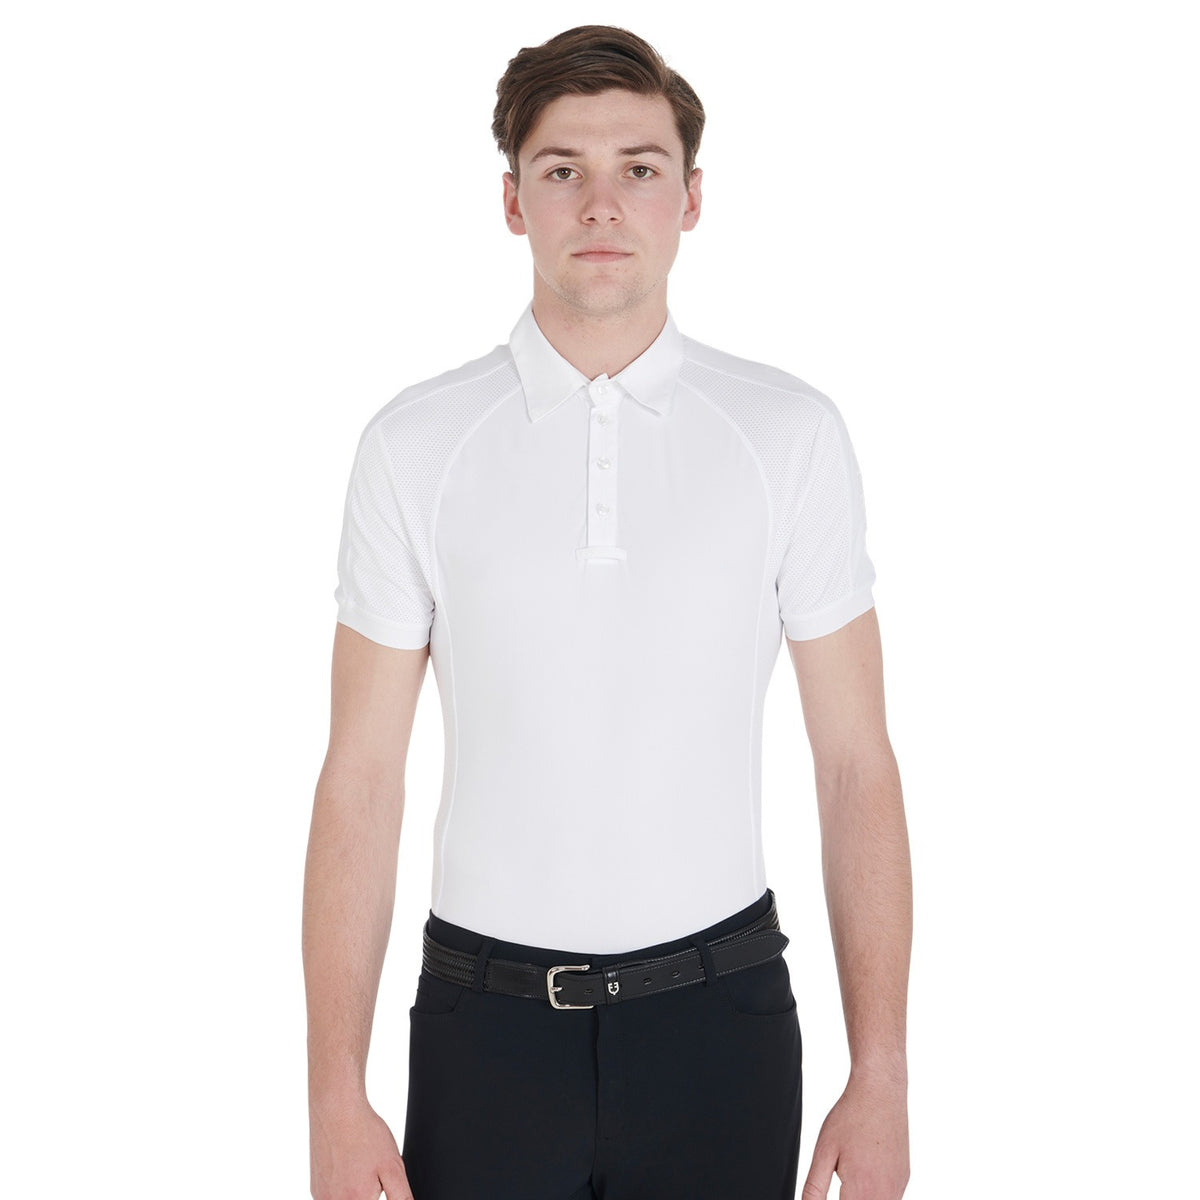 Equestro Men's Slim Fit Competition Polo Shirt W/ 4 Buttons